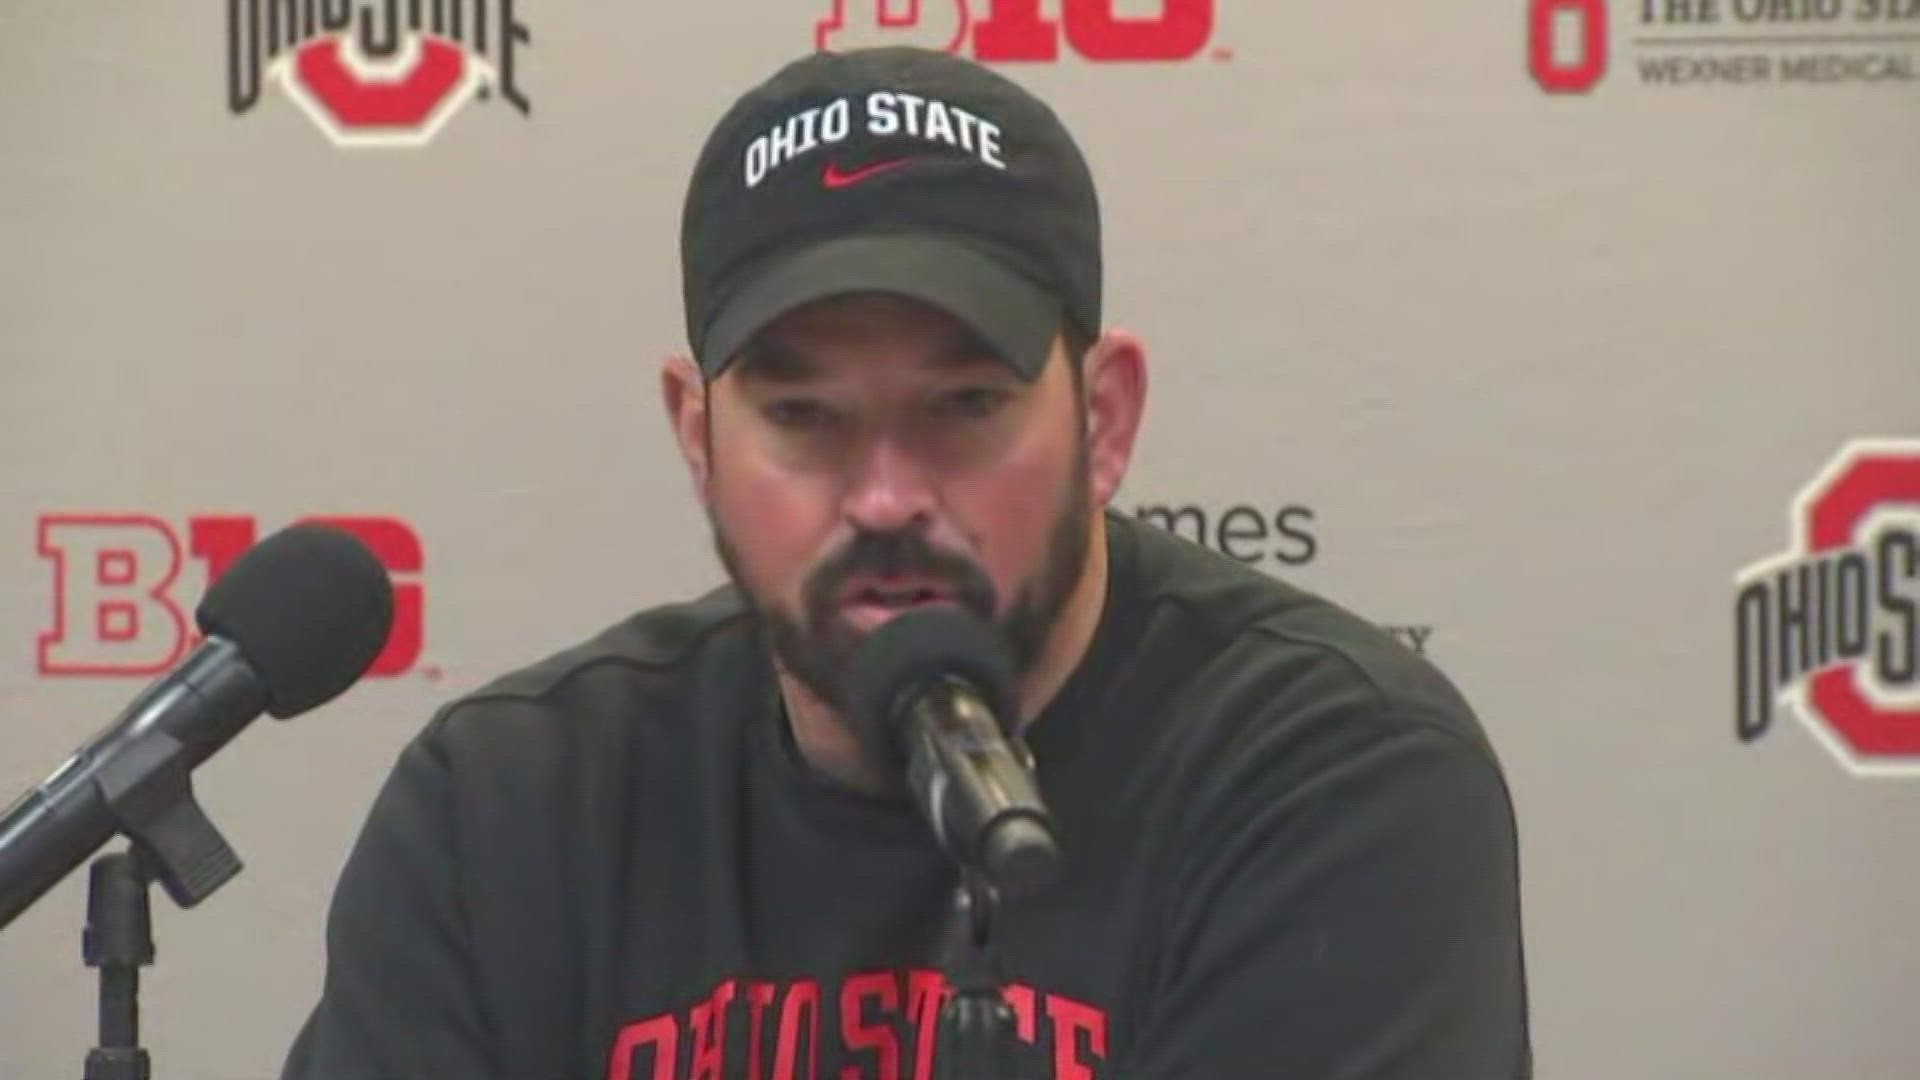 Ohio State's defense gave up 297 rushing yards and six scores on the ground against Michigan.